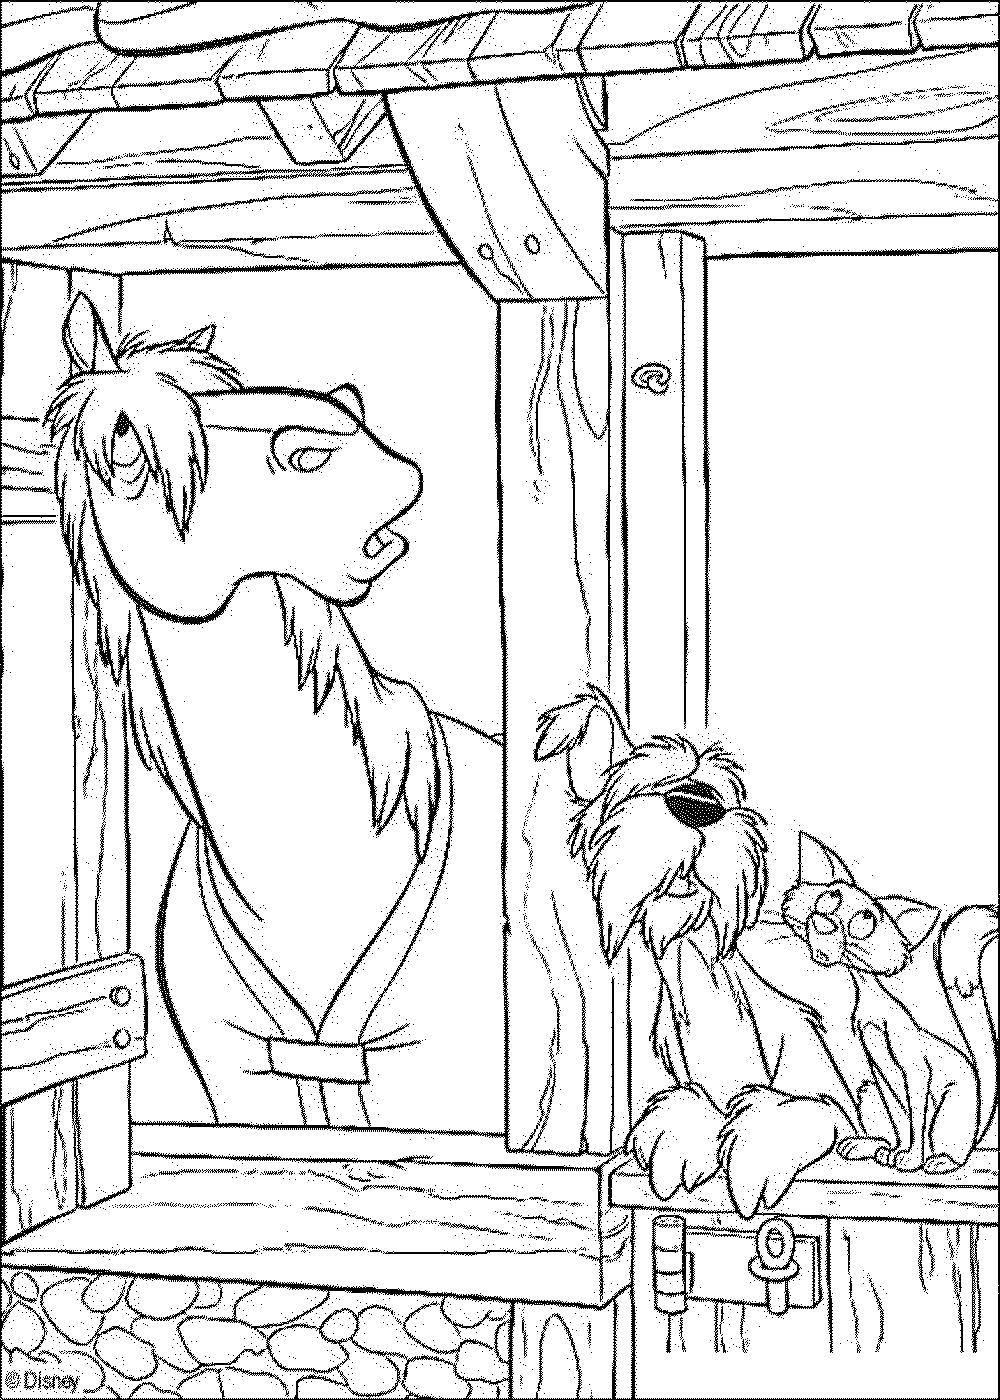 Coloring Horse, dog and cat. Category Pets allowed. Tags:  livestock, animals, horse, dog, cat.